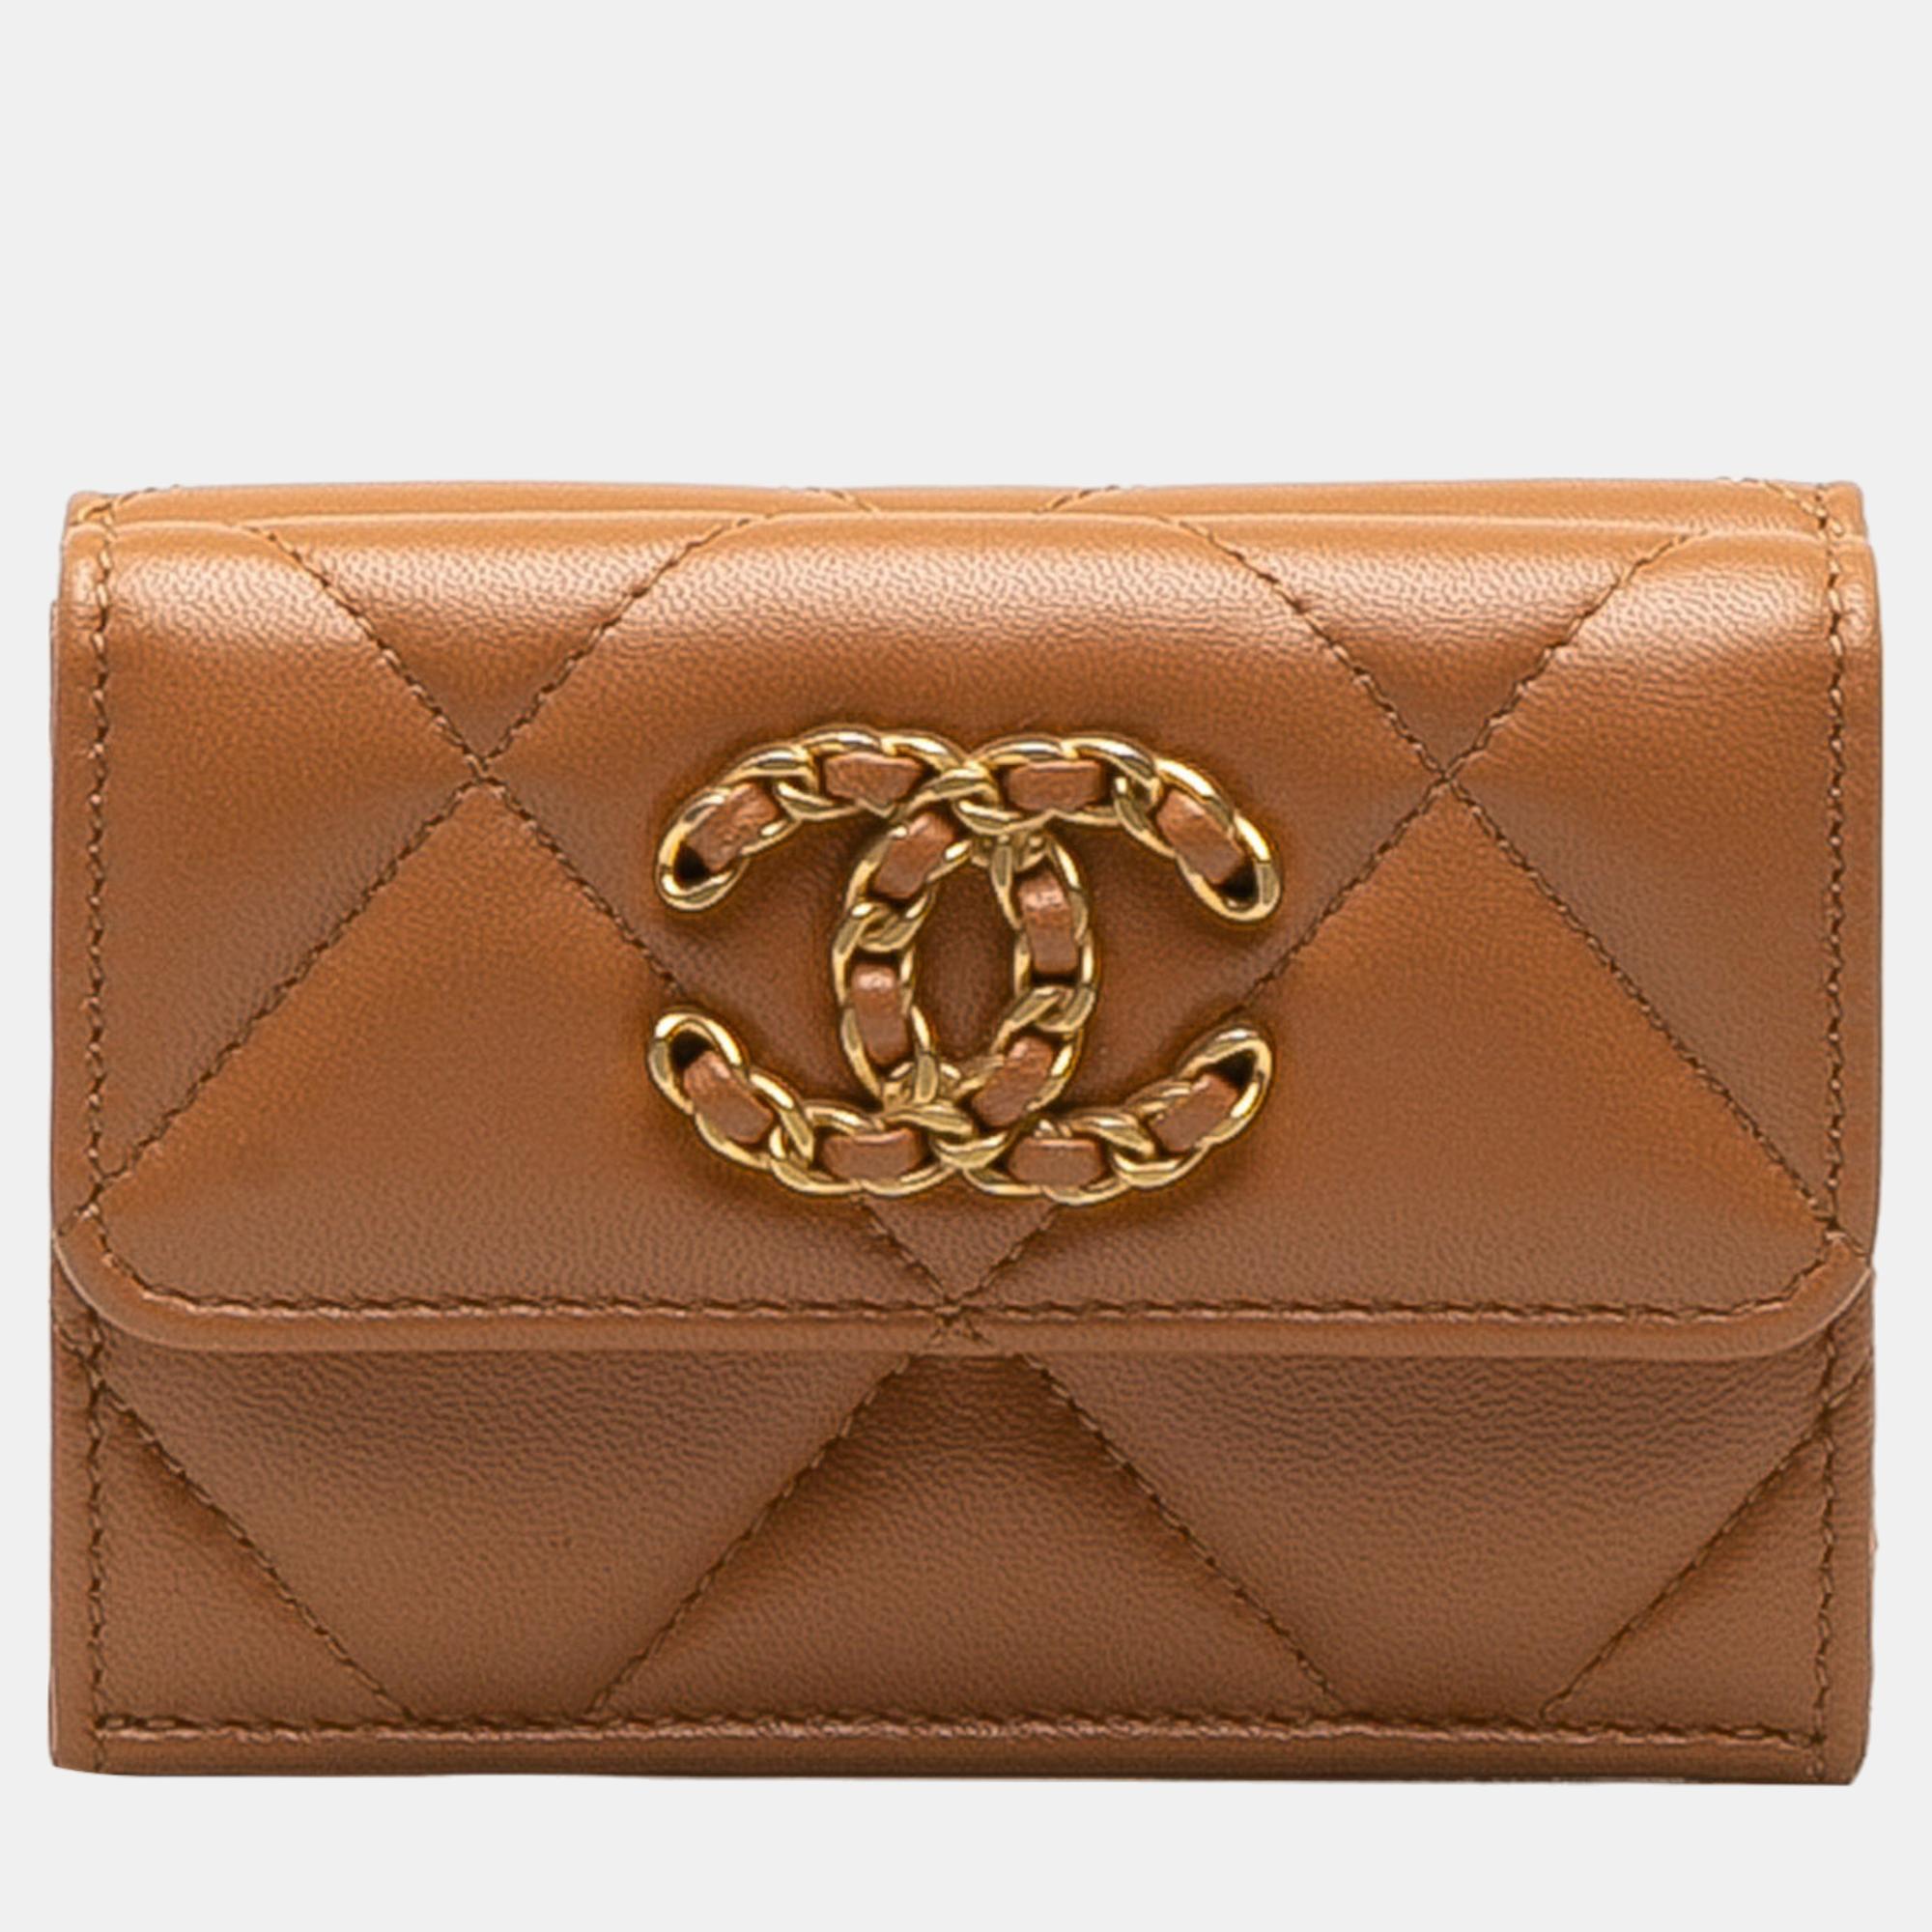 Chanel brown 19 trifold flap compact wallet